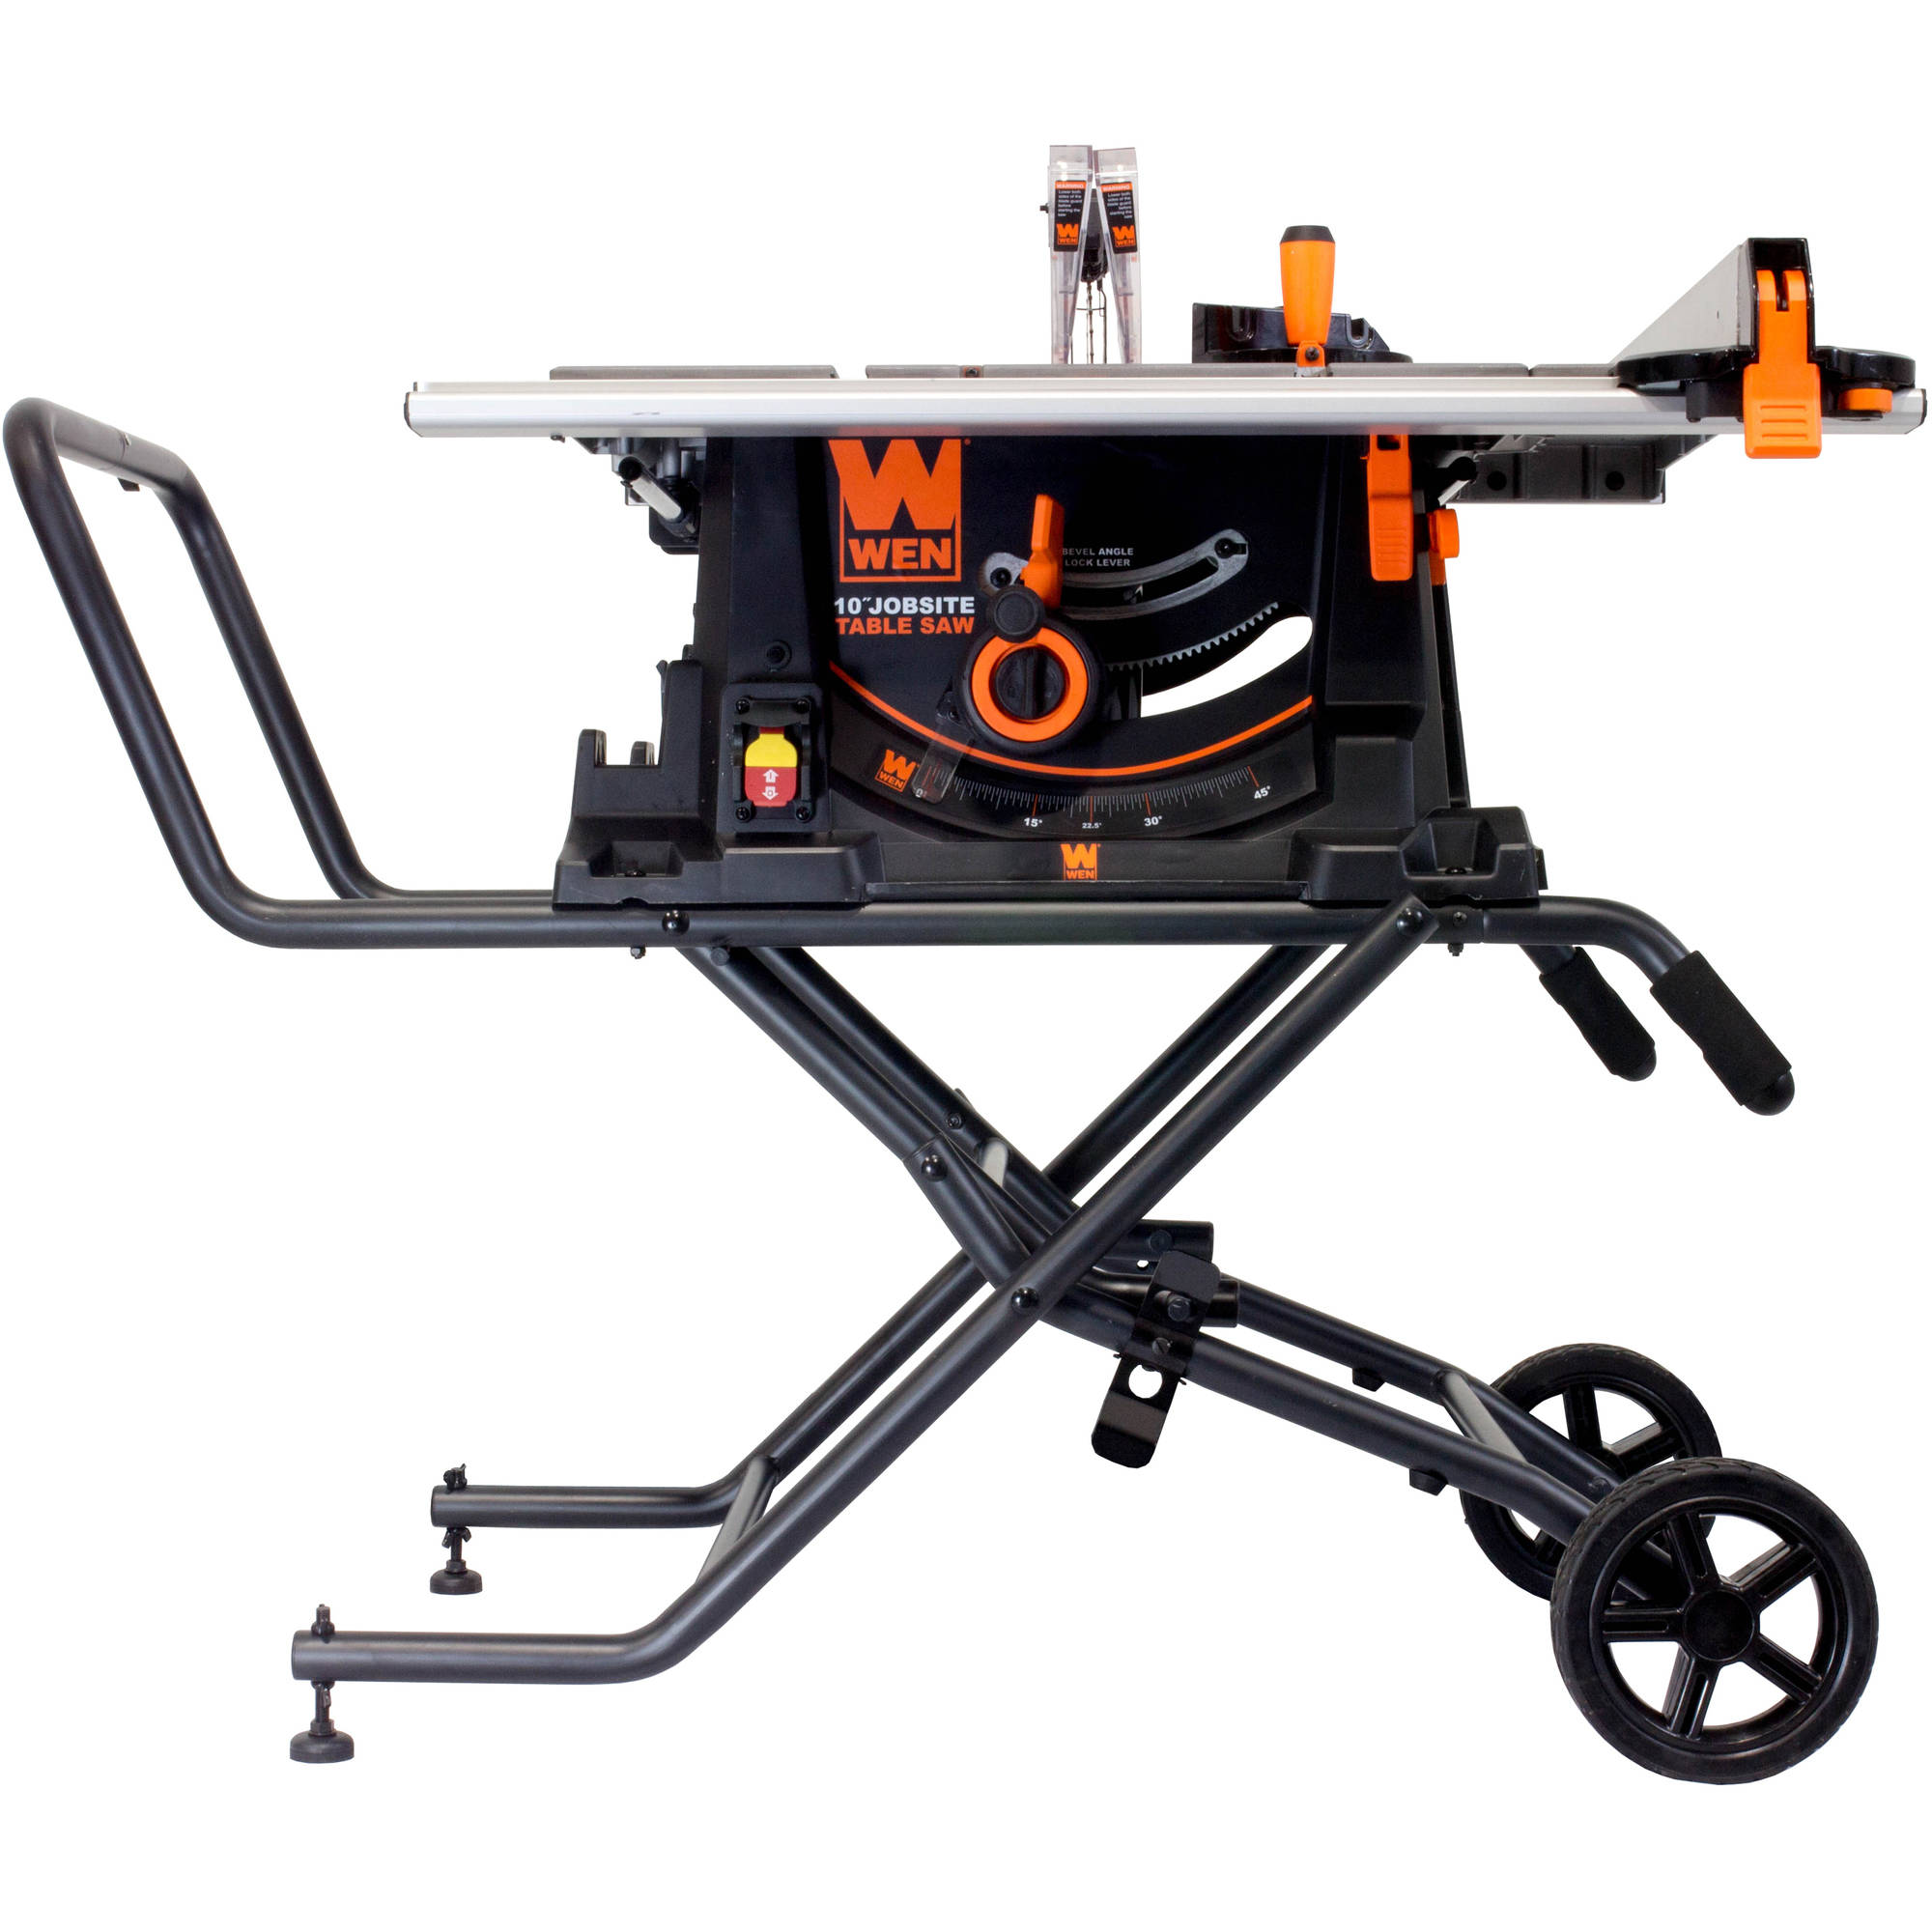 WEN 10-Inch Jobsite Table Saw With Rolling Stand, 3720 - image 2 of 4